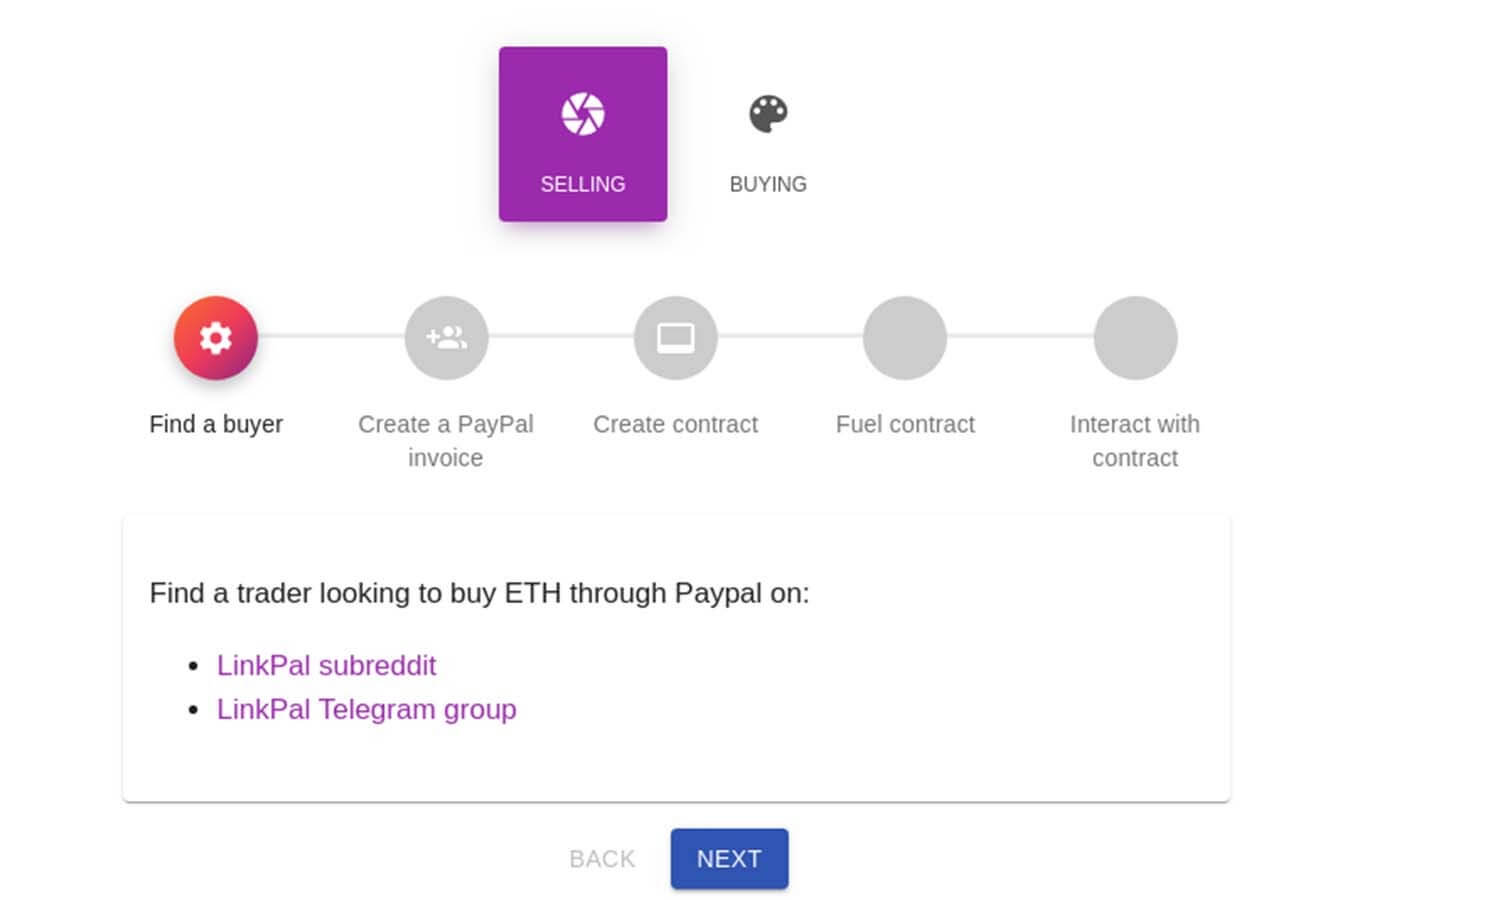 The initial LinkPal dashboard showcasing the 5 steps to complete a transaction